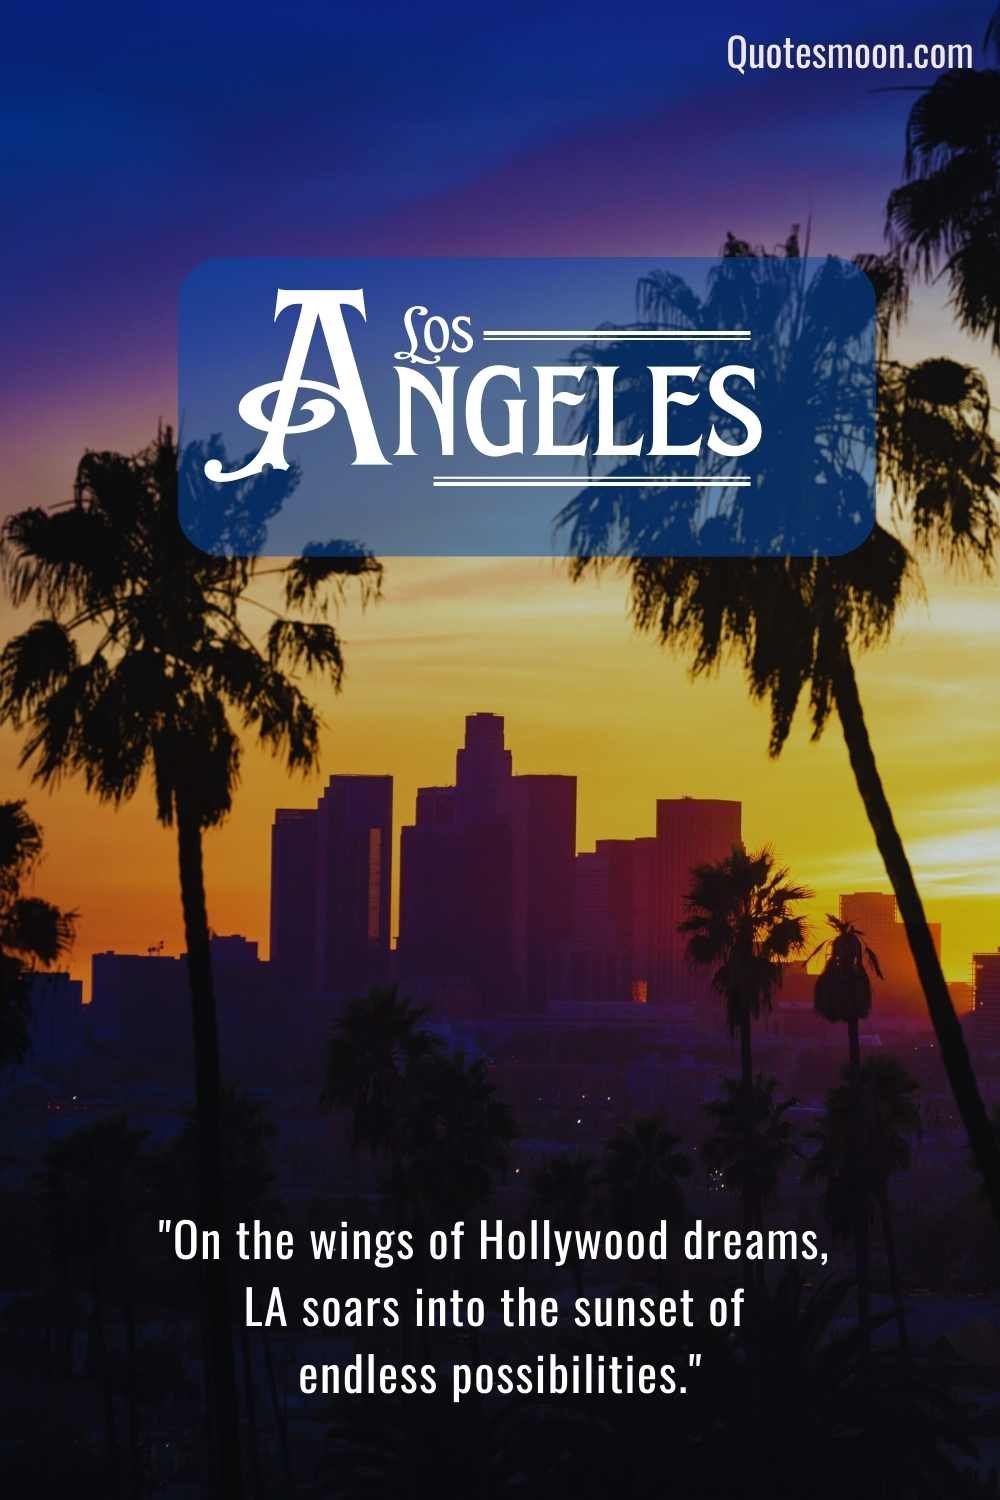 Los Angeles Trip Quotes with pics HD